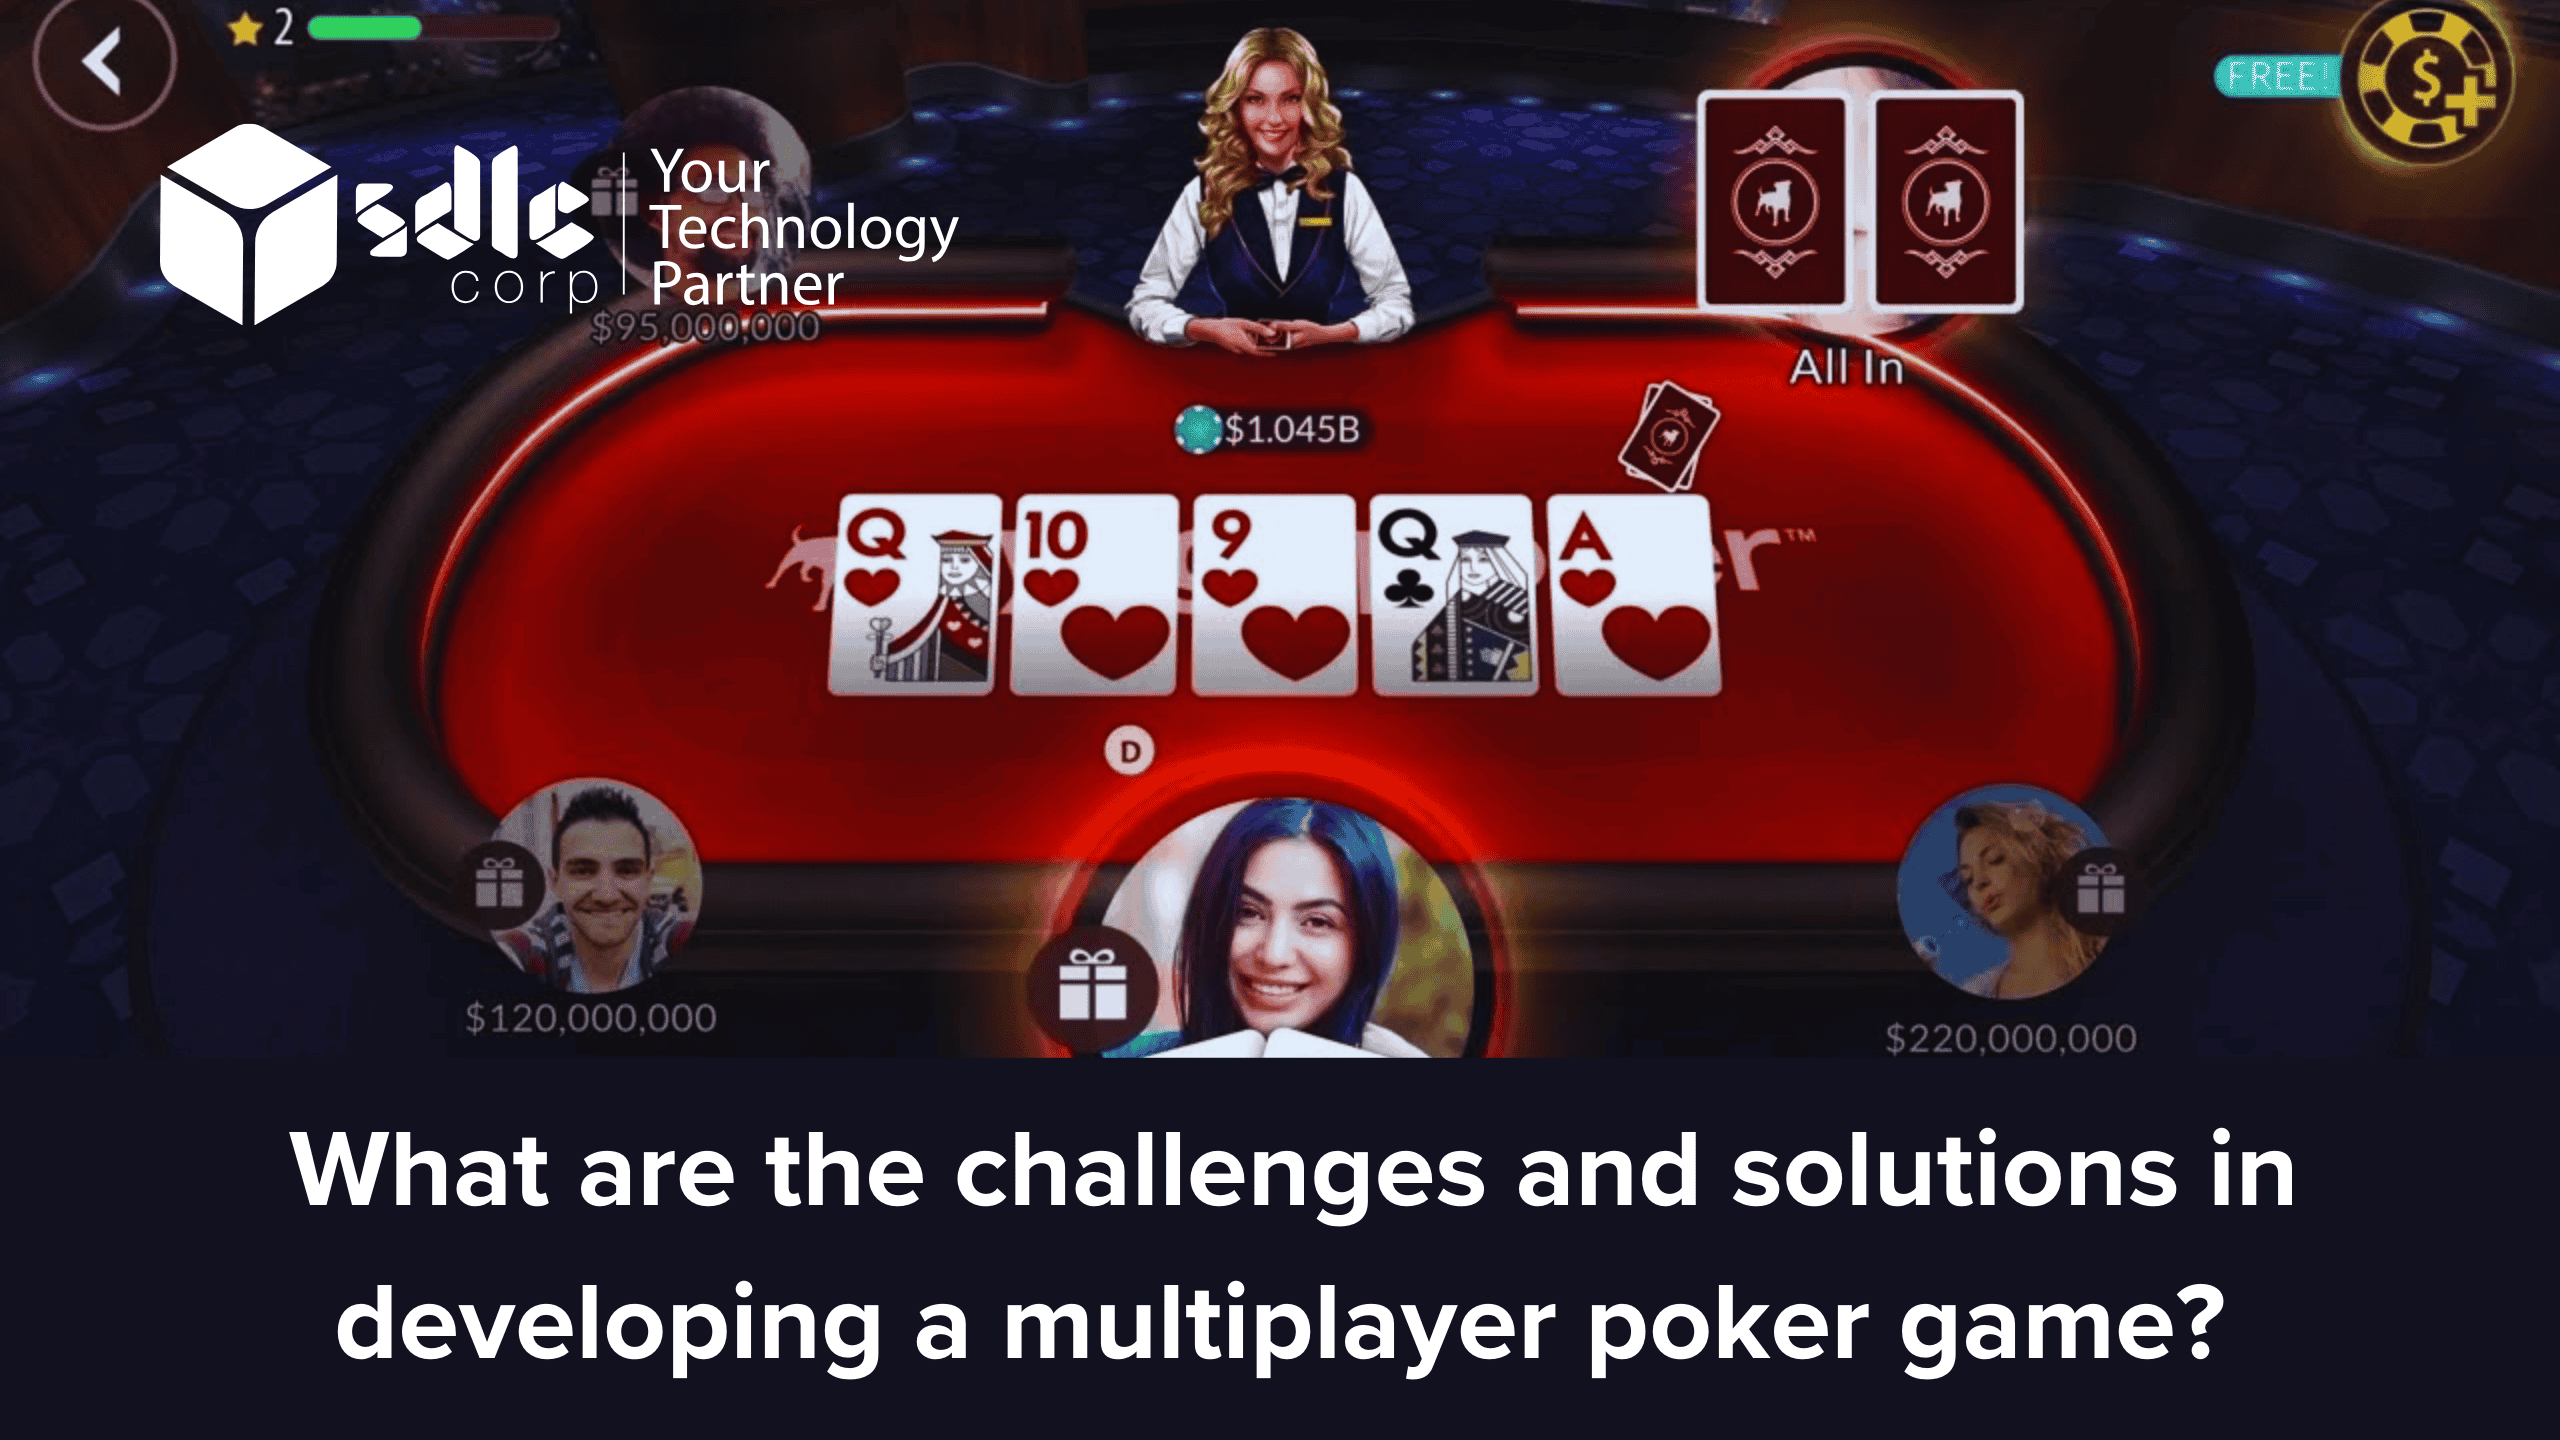 What are the challenges and solutions in developing a multiplayer poker game?